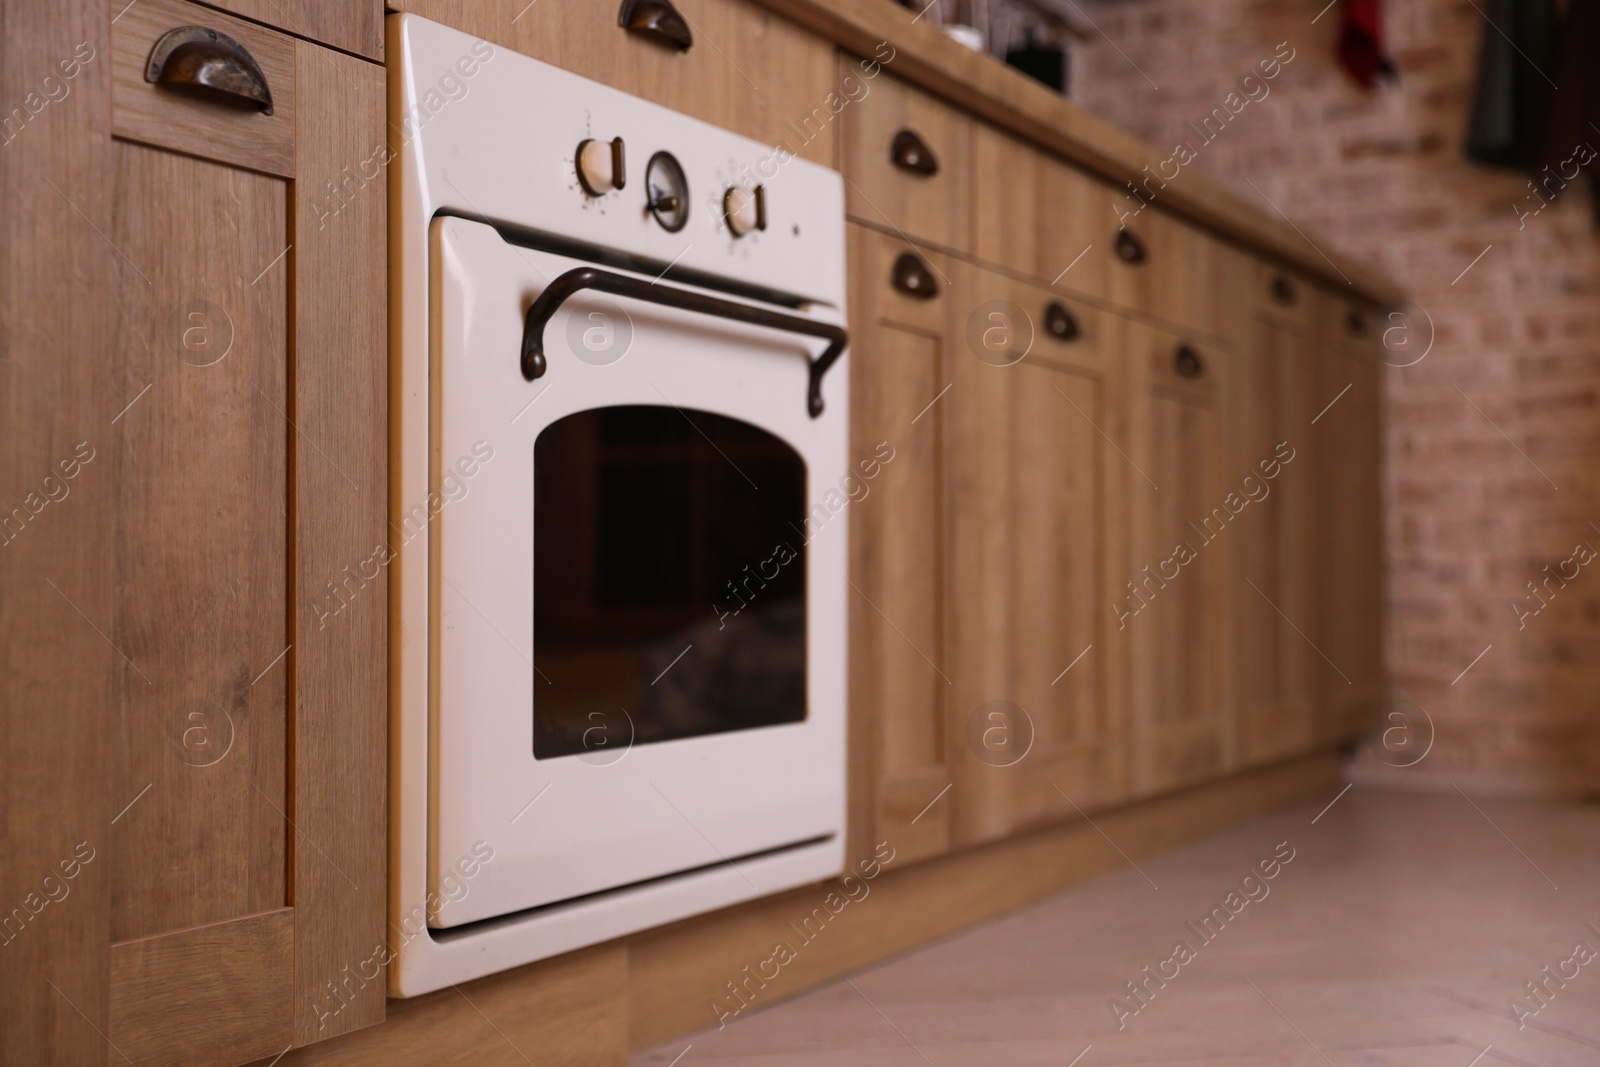 Photo of Stylish vintage oven built in kitchen furniture